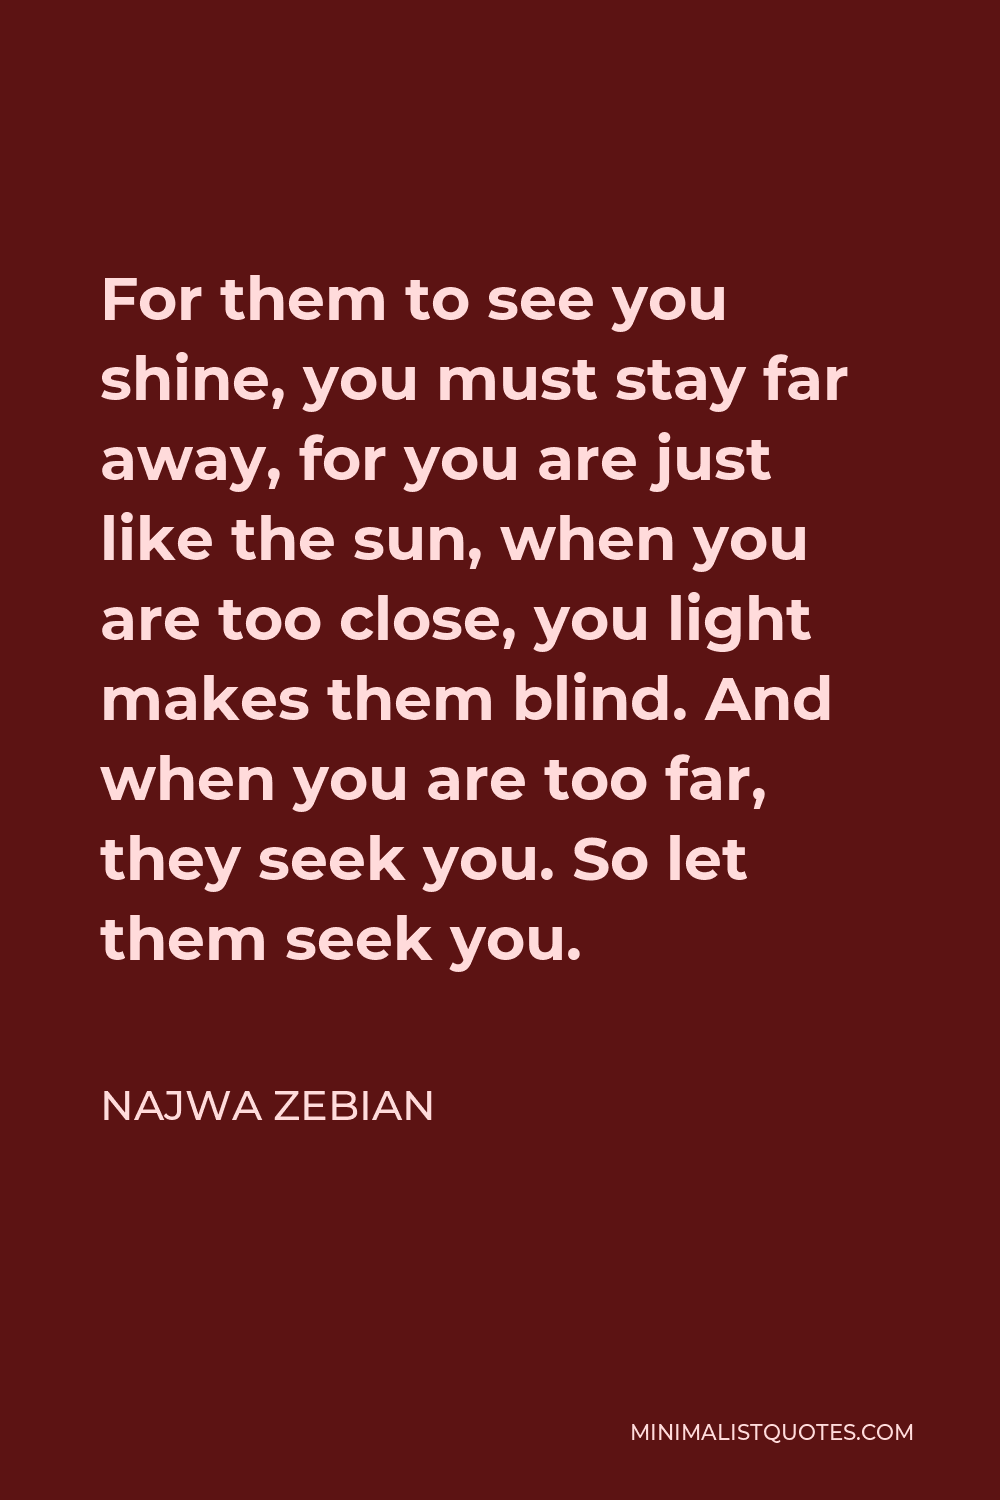 Najwa Zebian Quote - For them to see you shine, you must stay far away, for you are just like the sun, when you are too close, you light makes them blind. And when you are too far, they seek you. So let them seek you.